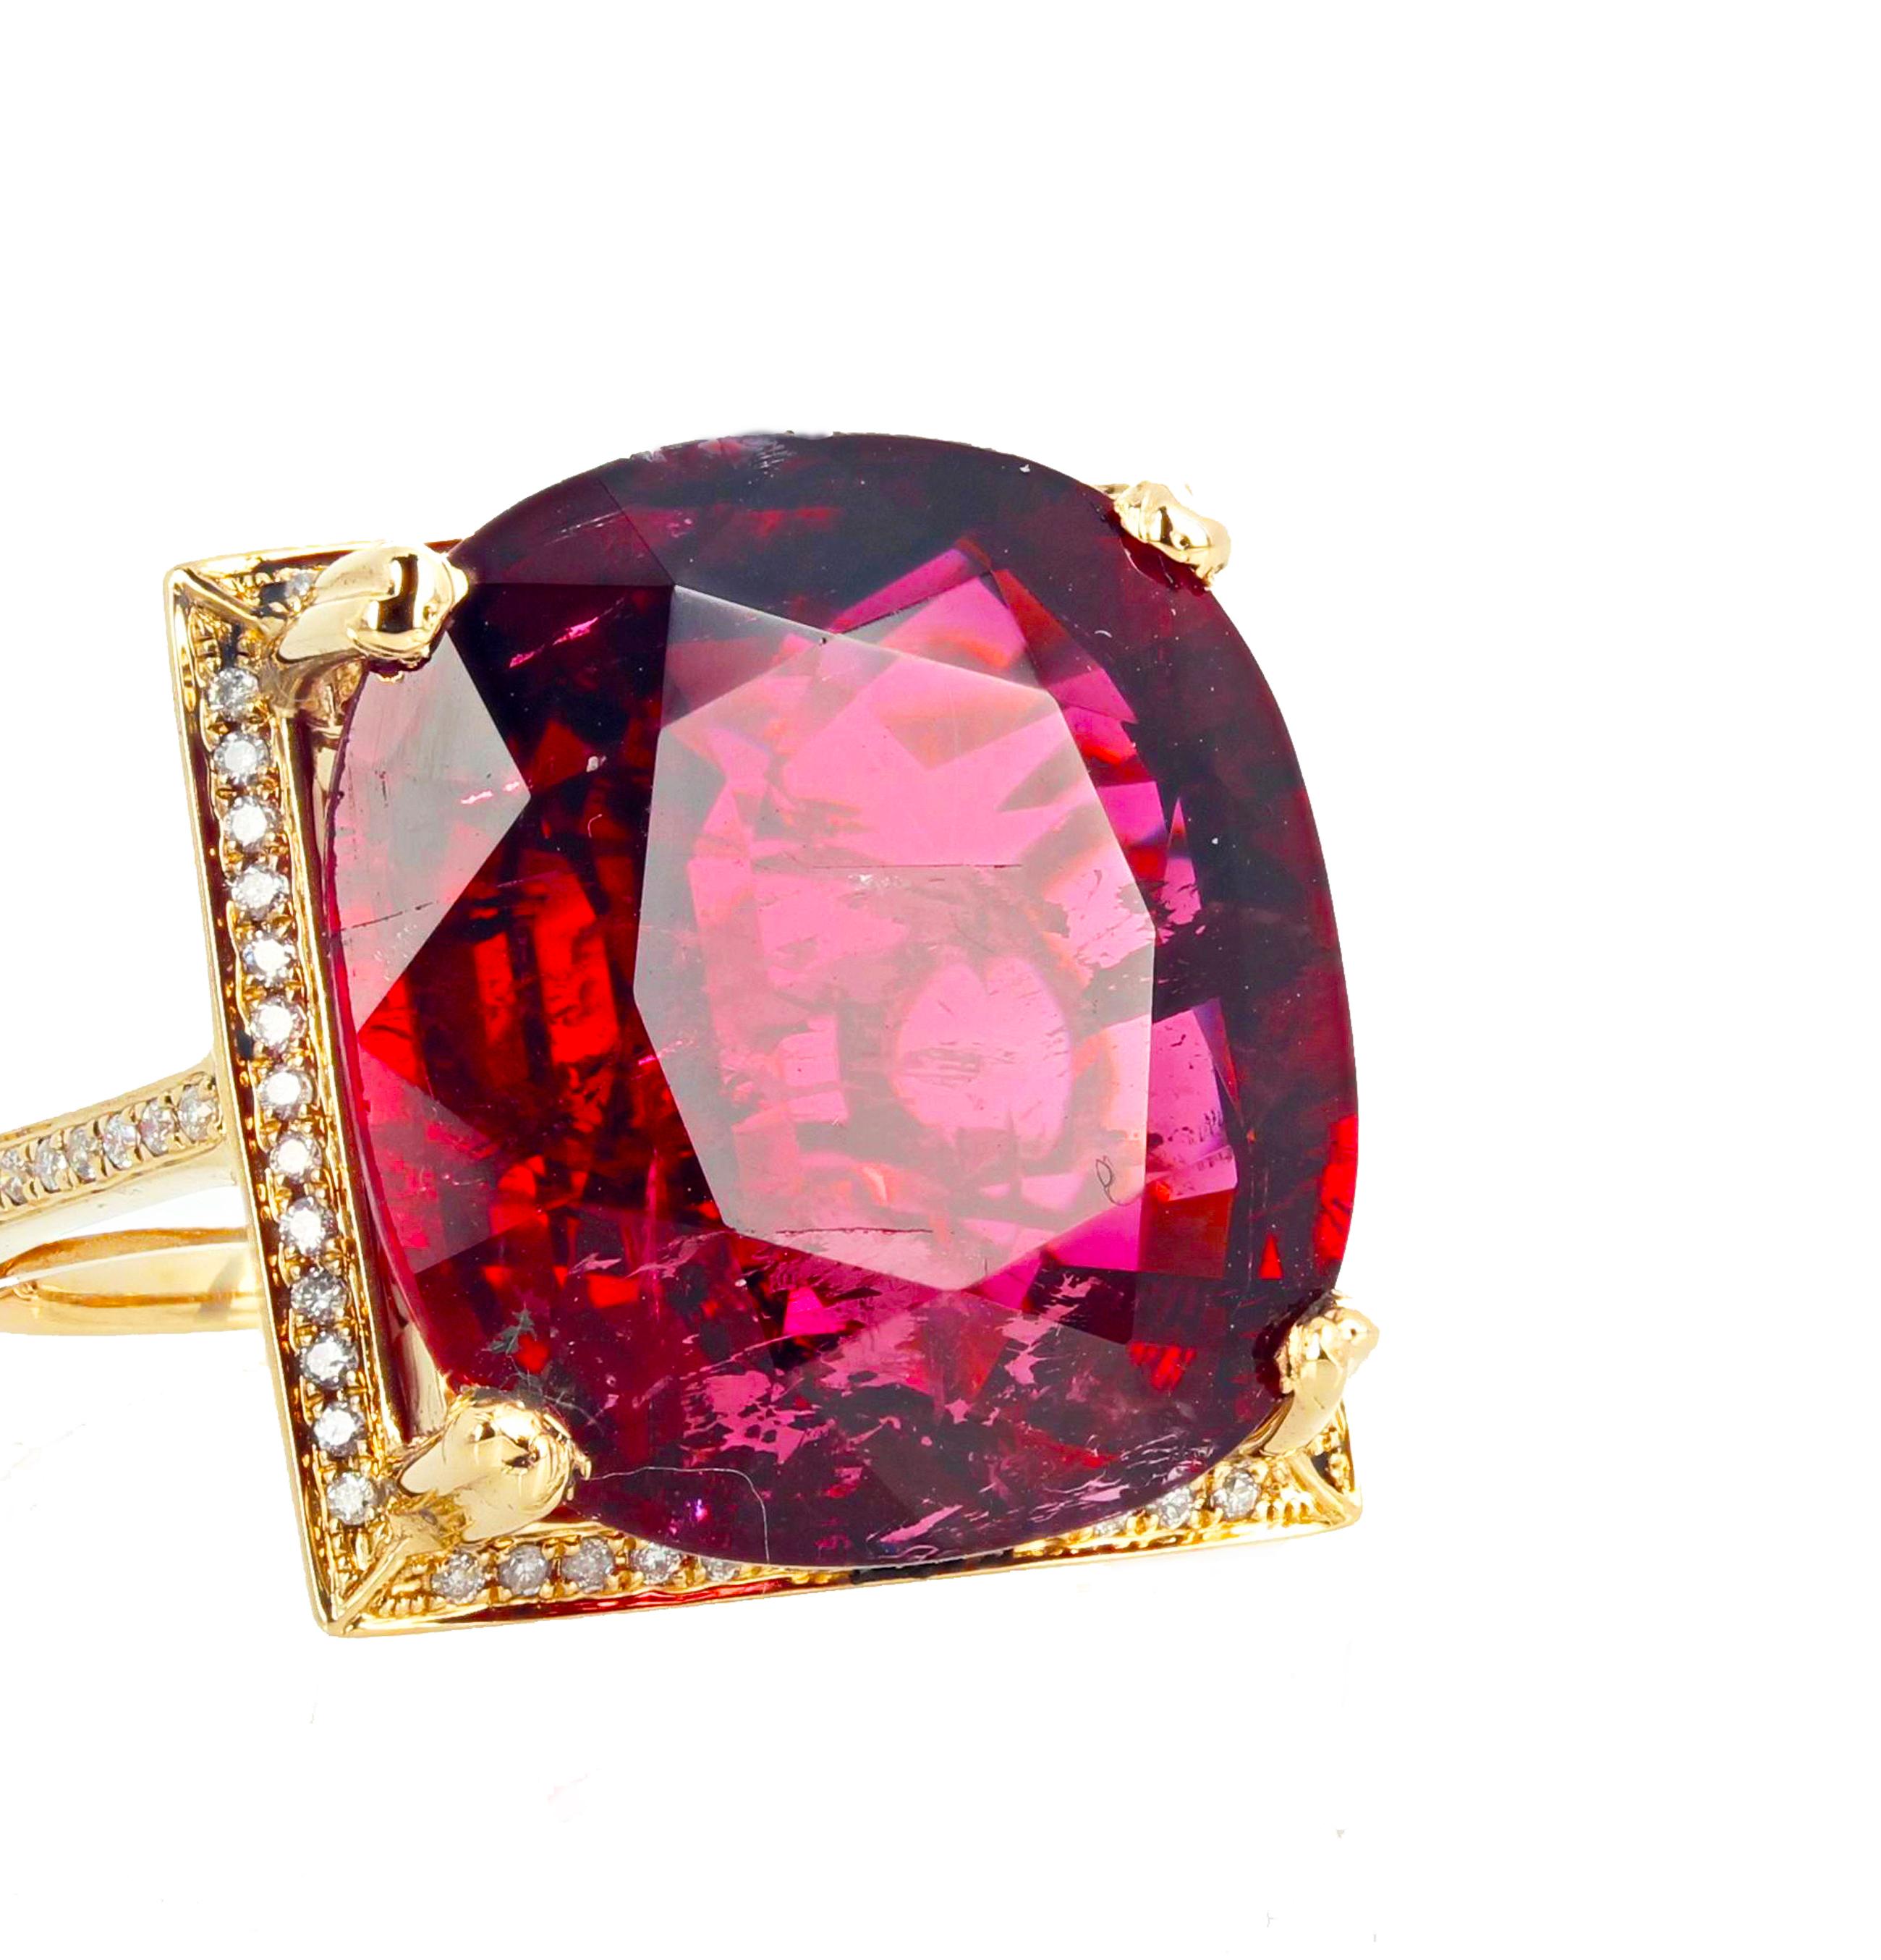 AJD Glittering 16.21 Ct. Clear Red Tourmaline & Diamond 14 Kt. Yellow Gold Ring For Sale 2